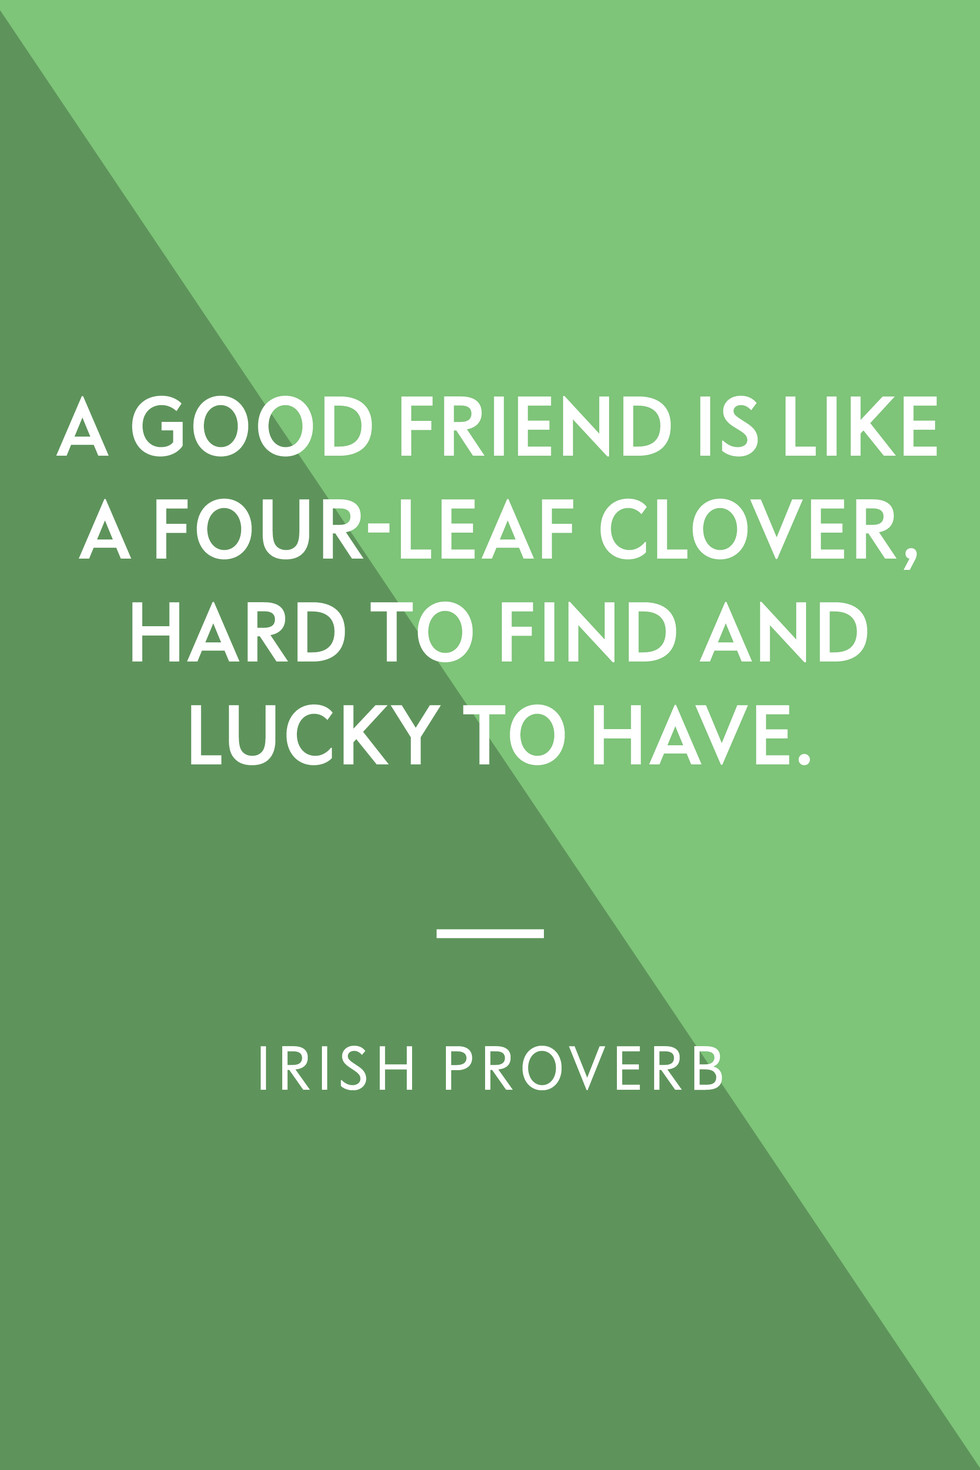 St Patrick's Day Quotes And Sayings
 20